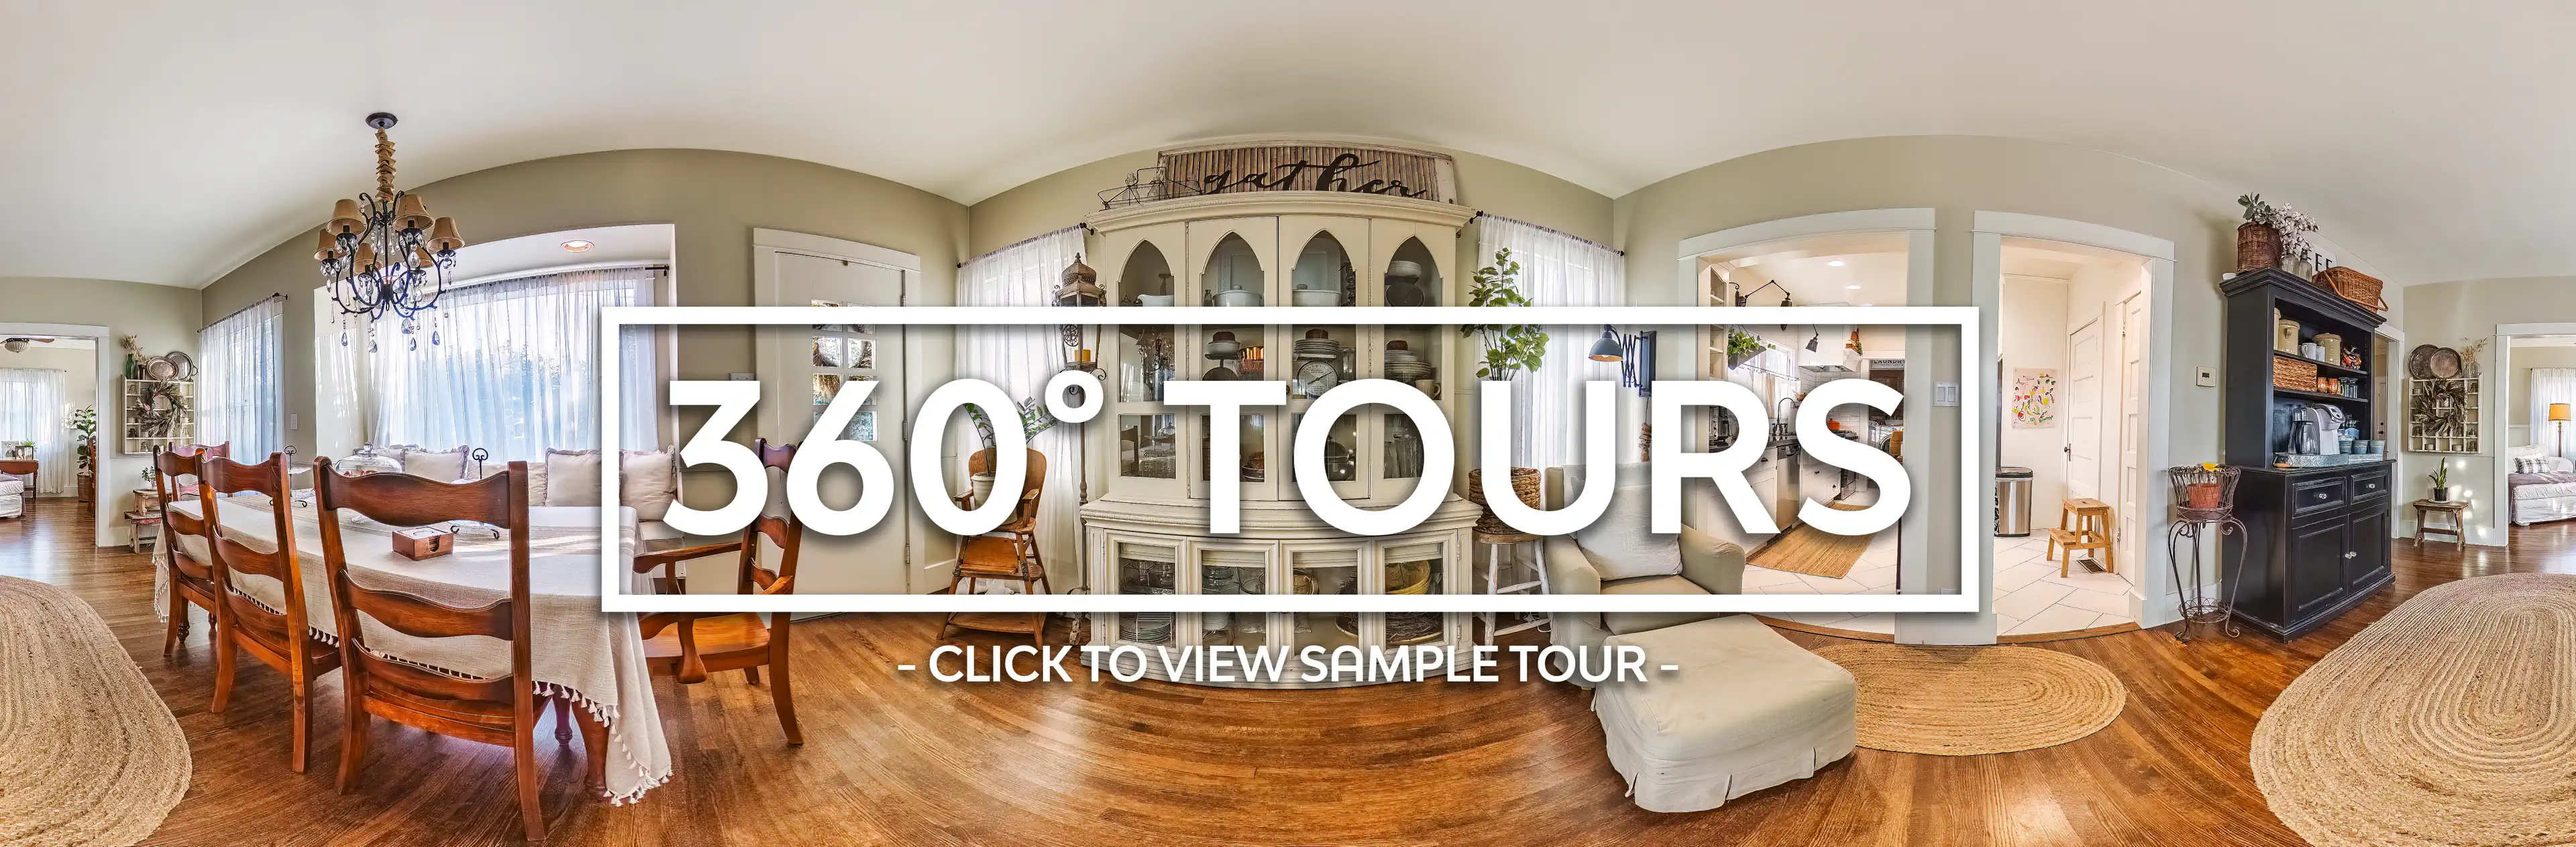 An immersive 360-degree virtual tour of a property for sale in the MLS listing, allowing viewers to explore every detail of the space from the comfort of their own device.